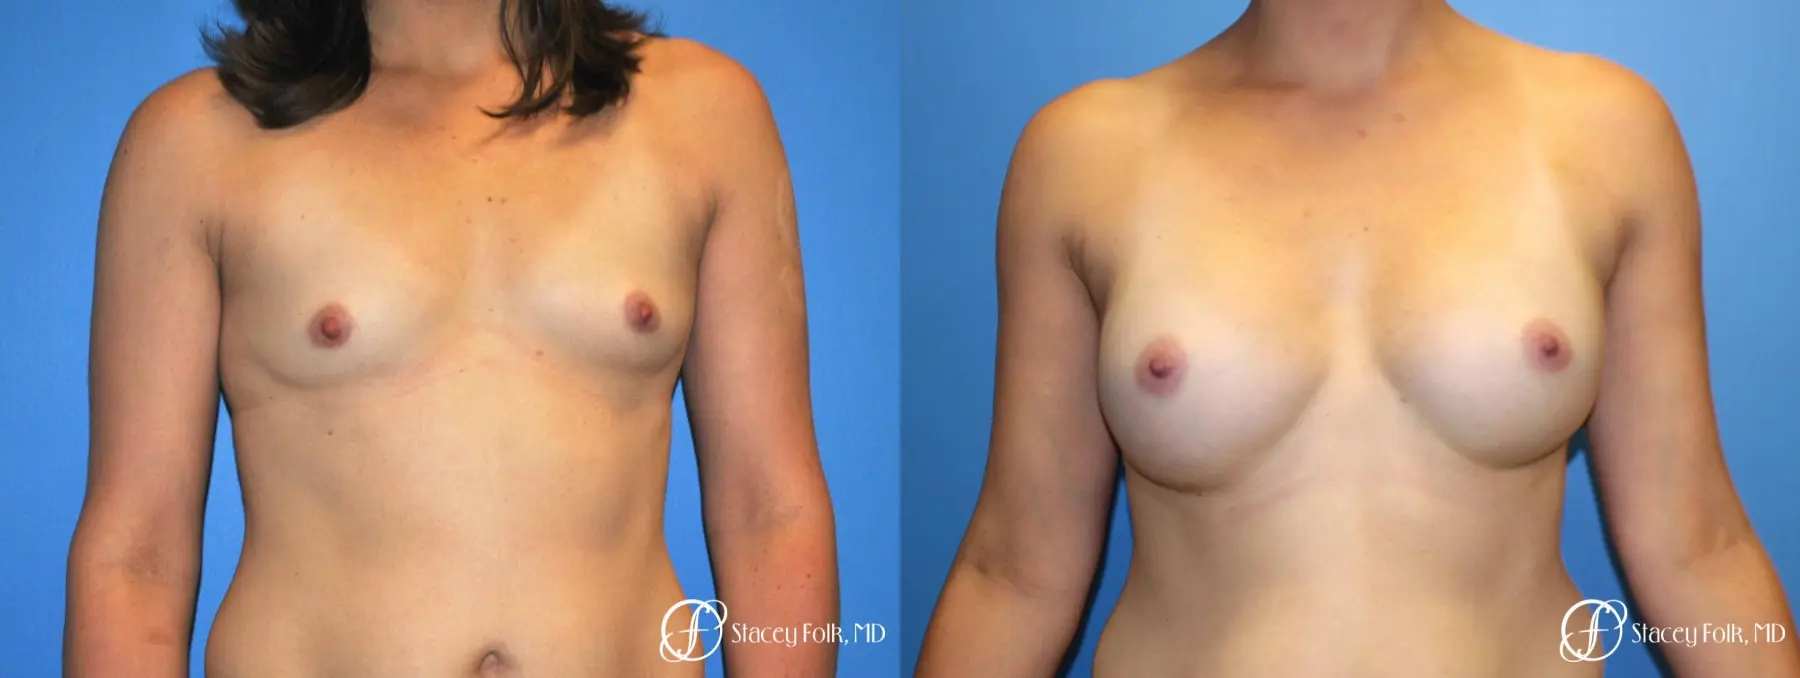 Denver Breast augmentation 7111 - Before and After 1